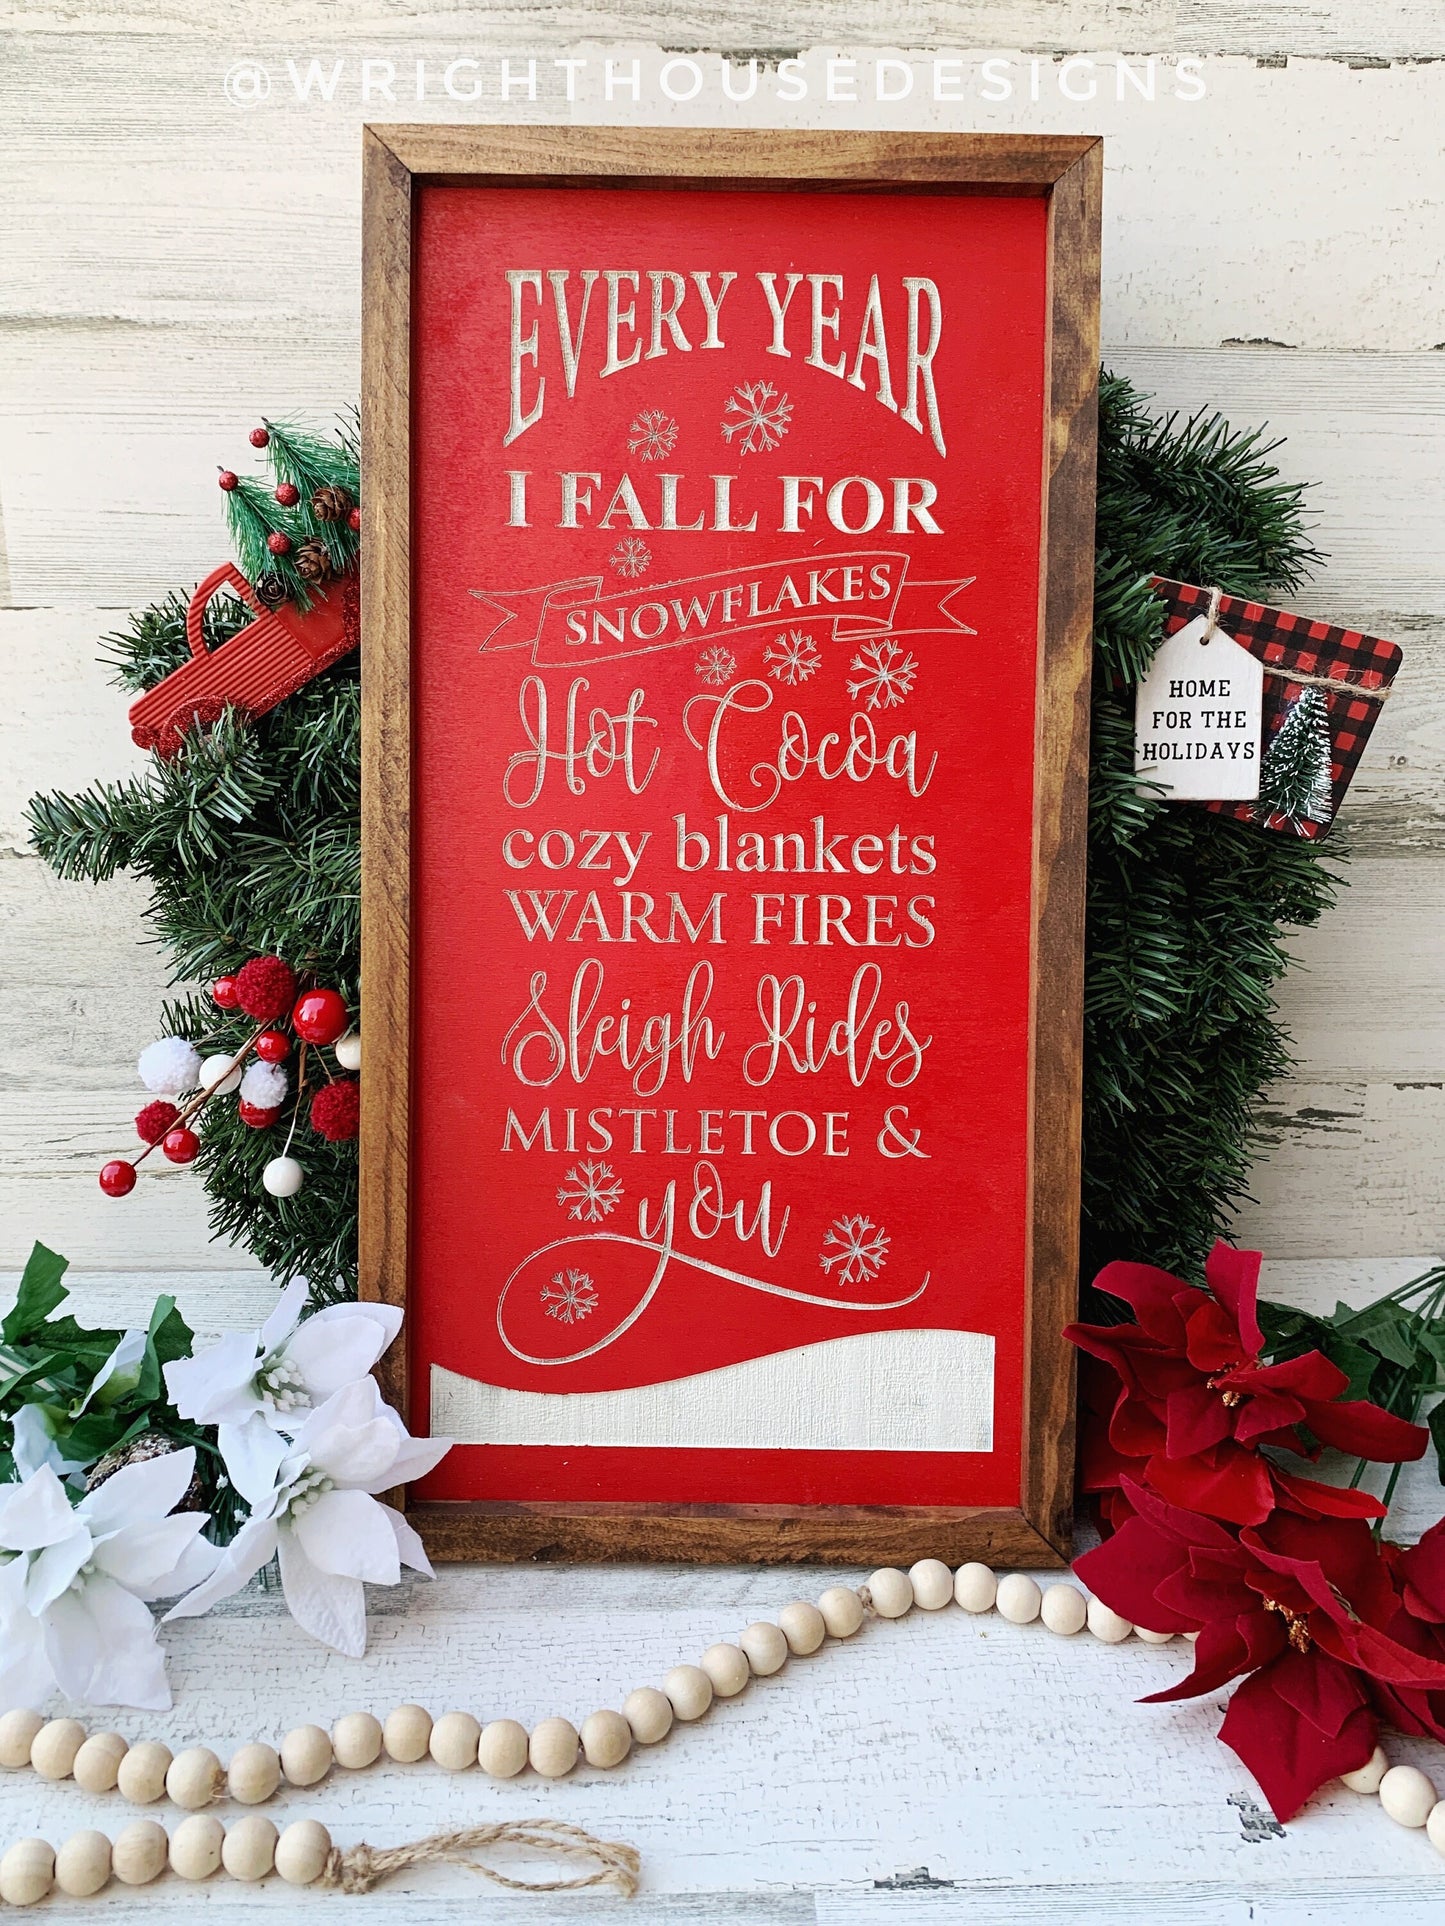 Every Year I Fall For Mistletoe and You - Warm and Cozy Christmas Coffee Bar Sign - Seasonal Winter Home Decor - Framed Wall Art - Wood Sign